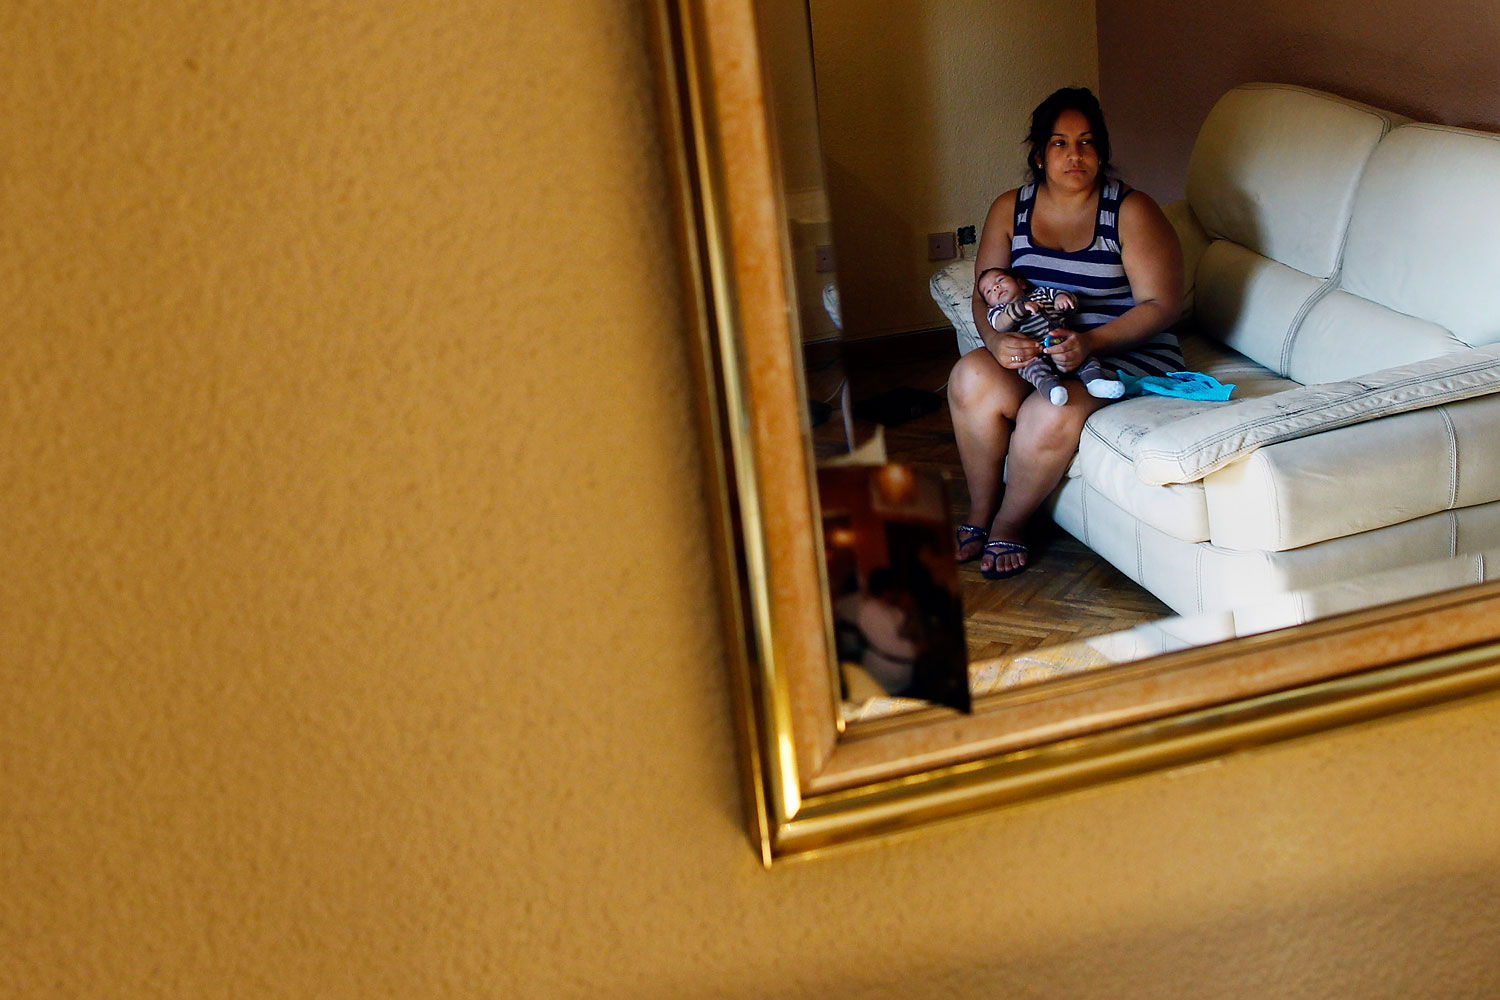 July 1, 2013. Maria Esperanza Flores Mendoza, with her baby as she waits to be evicted in Madrid. The landlord's loss of the apartment to a Ibercaja bank is causing Mendoza's eviction.